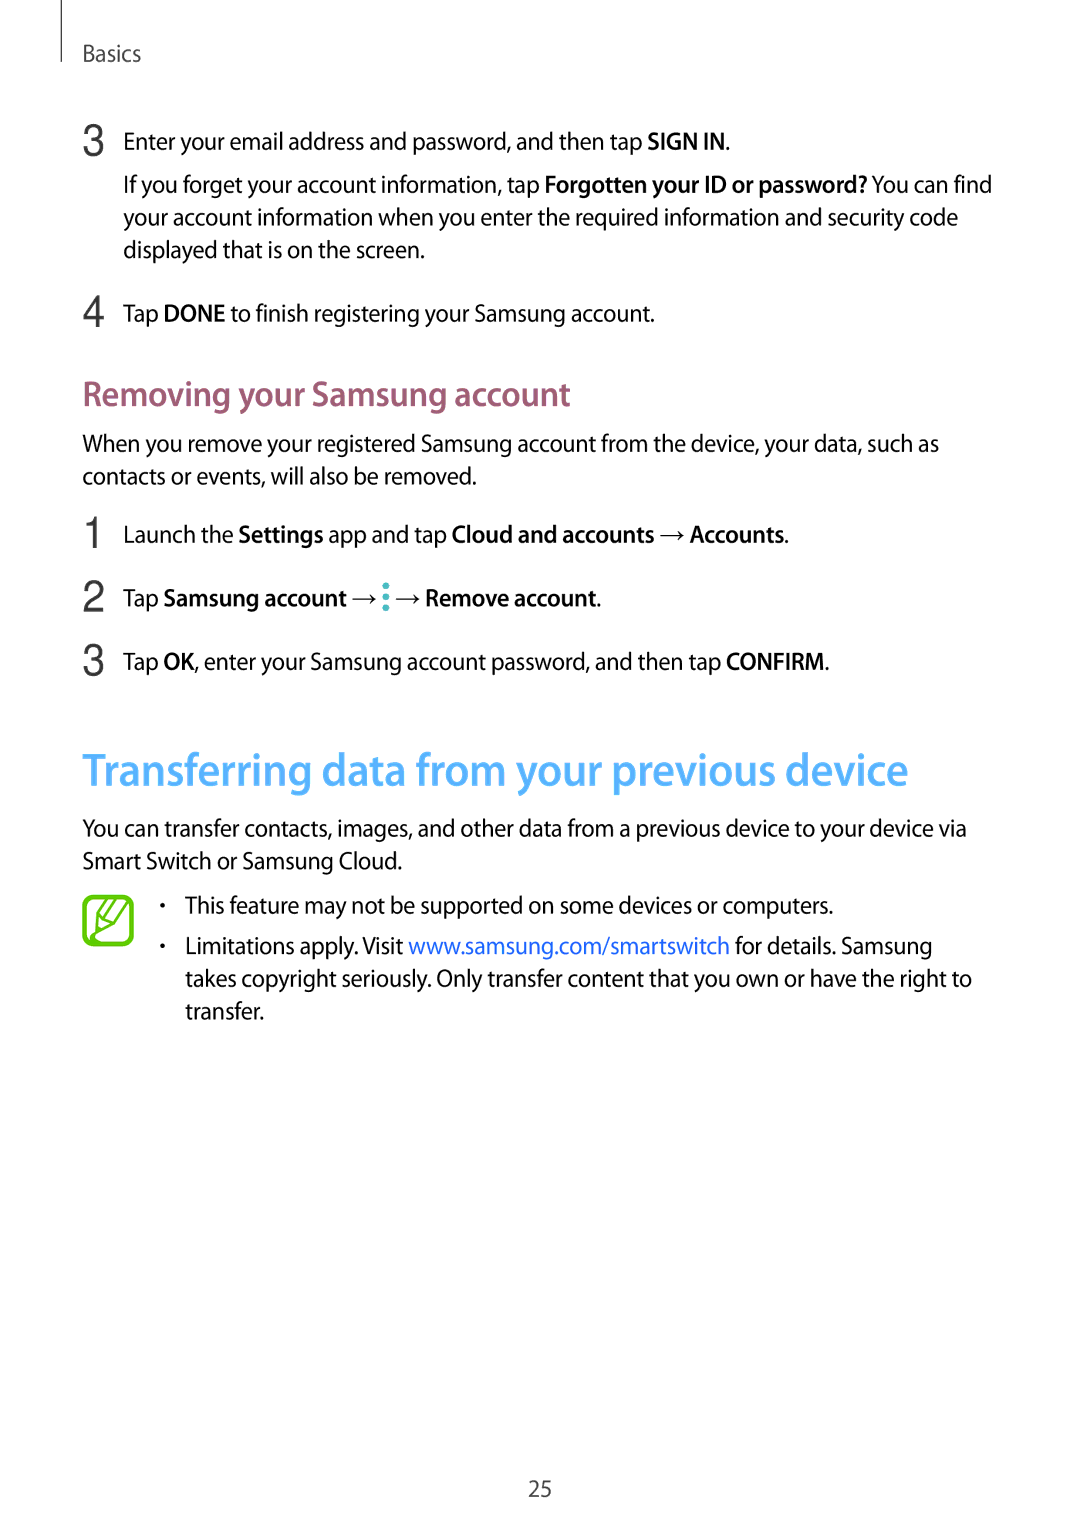 Samsung SM-T390NZKAXEF, SM-T390NZKAATO manual Transferring data from your previous device, Removing your Samsung account 